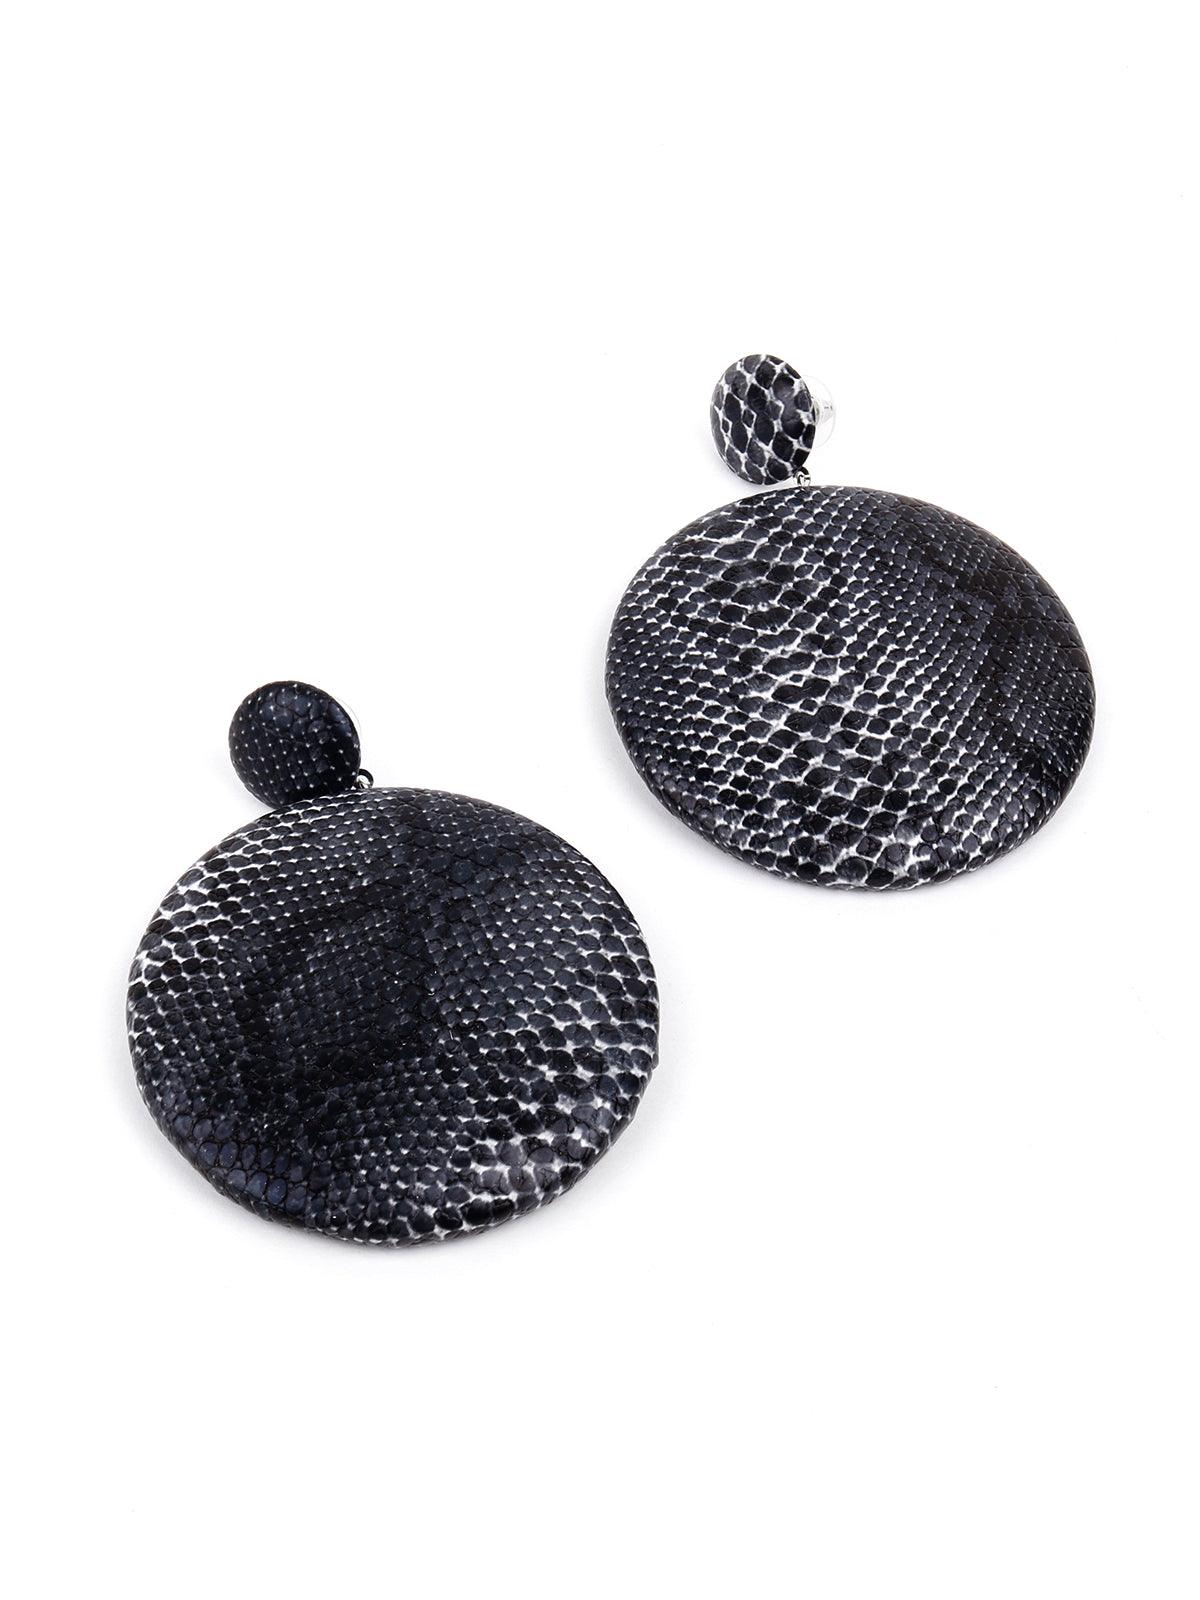 Women's Exquisite Black And White Croc Printed Rounded Earrings - Odette